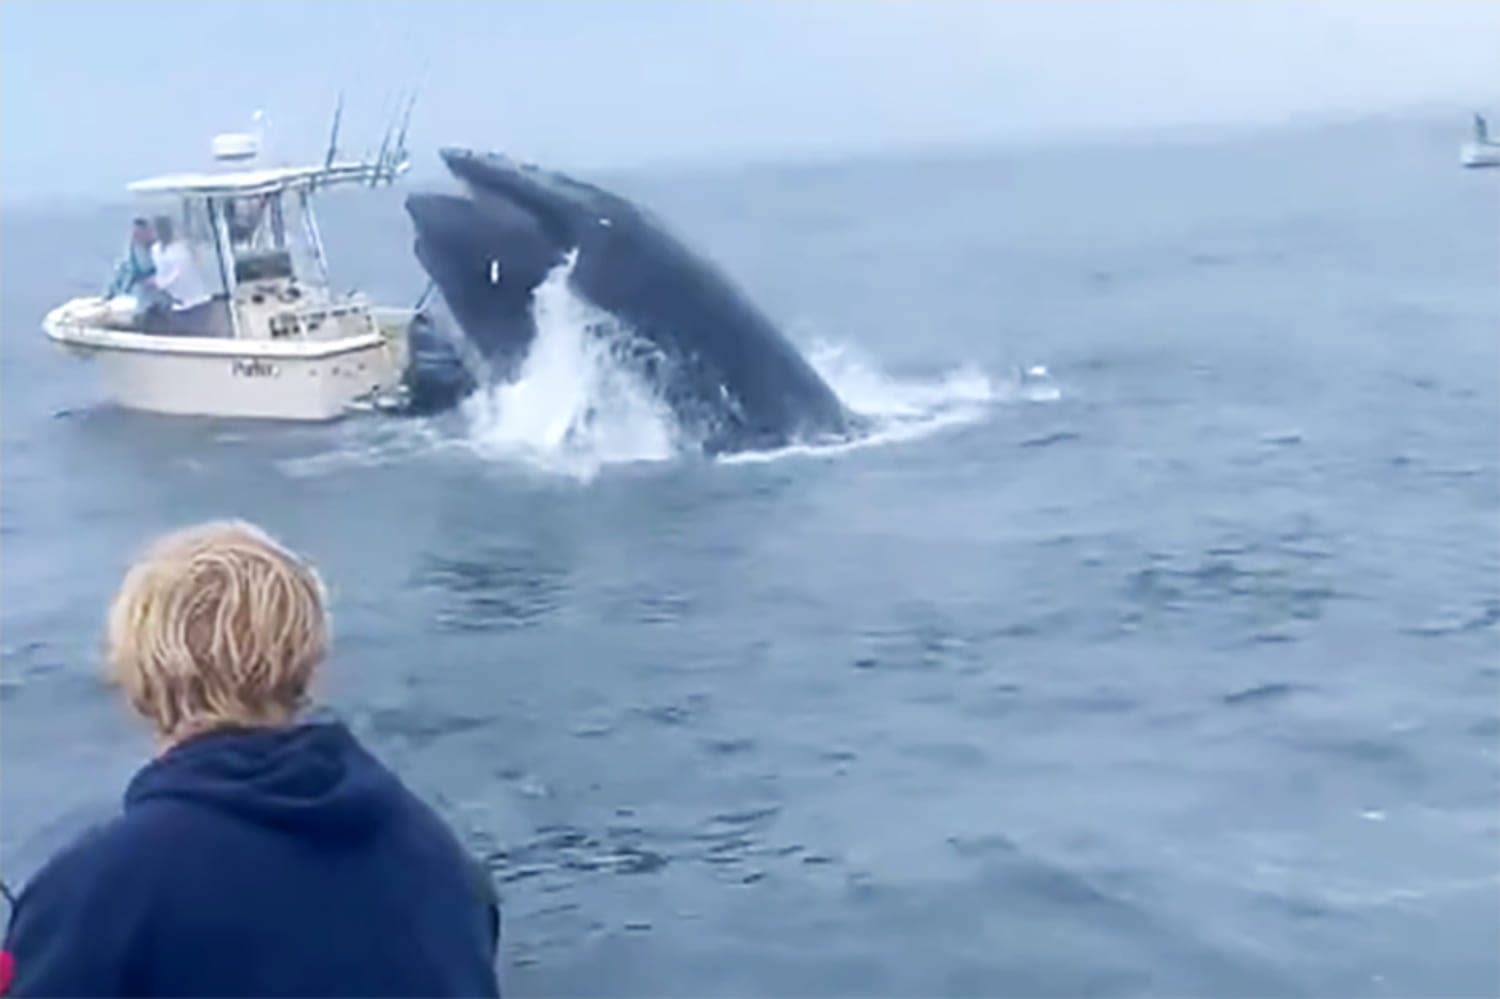 Dramatic video shows whale capsizing boat off New Hampshire